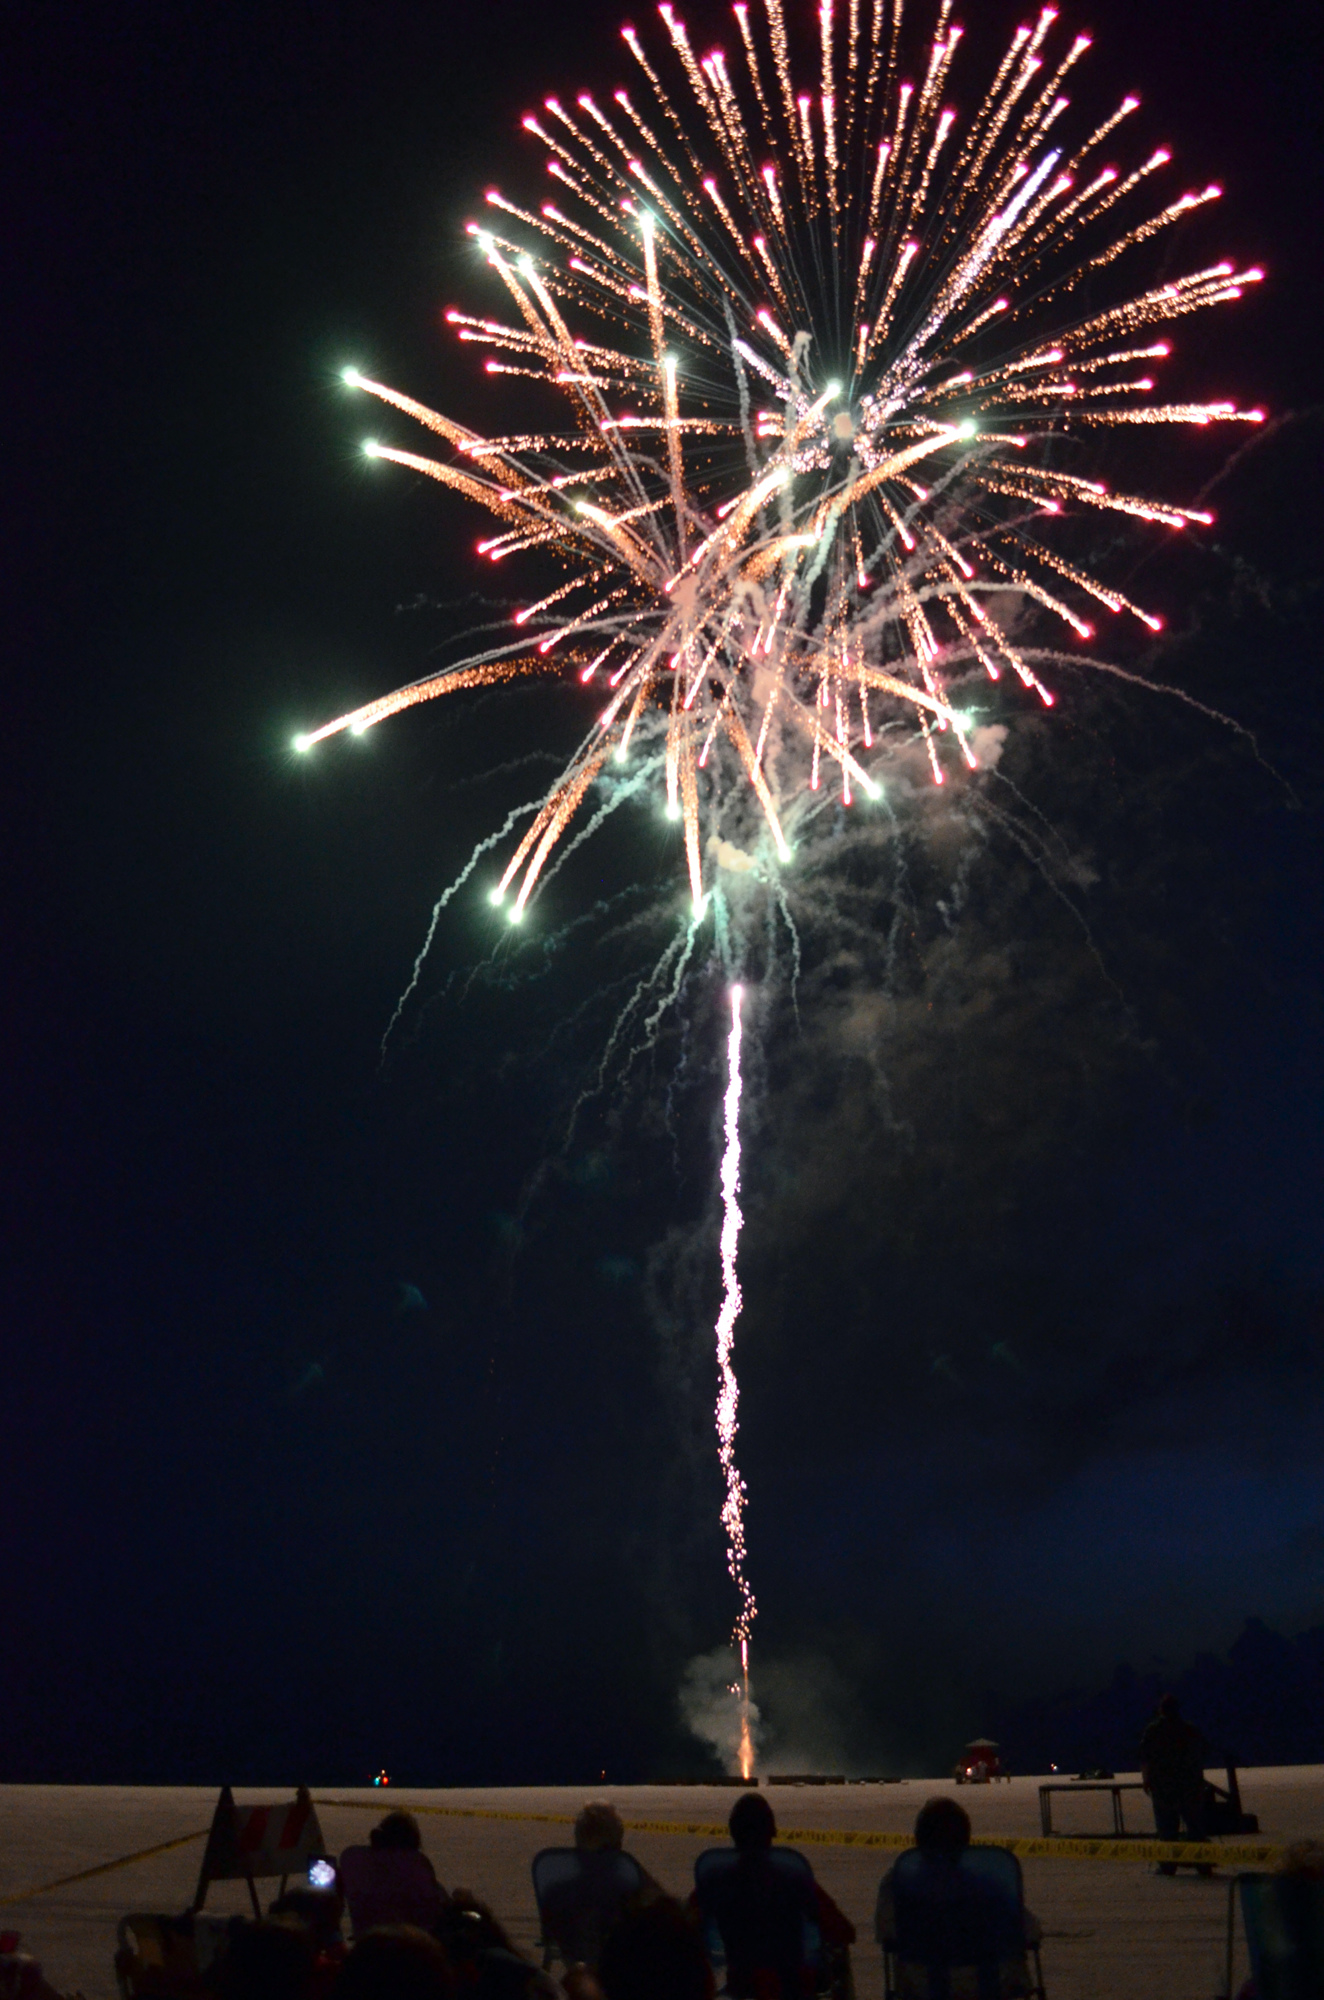 Fireworks light up Siesta Key last year for the Fourth of July. Although the VIP party is canceled, the fireworks will go on again this year.